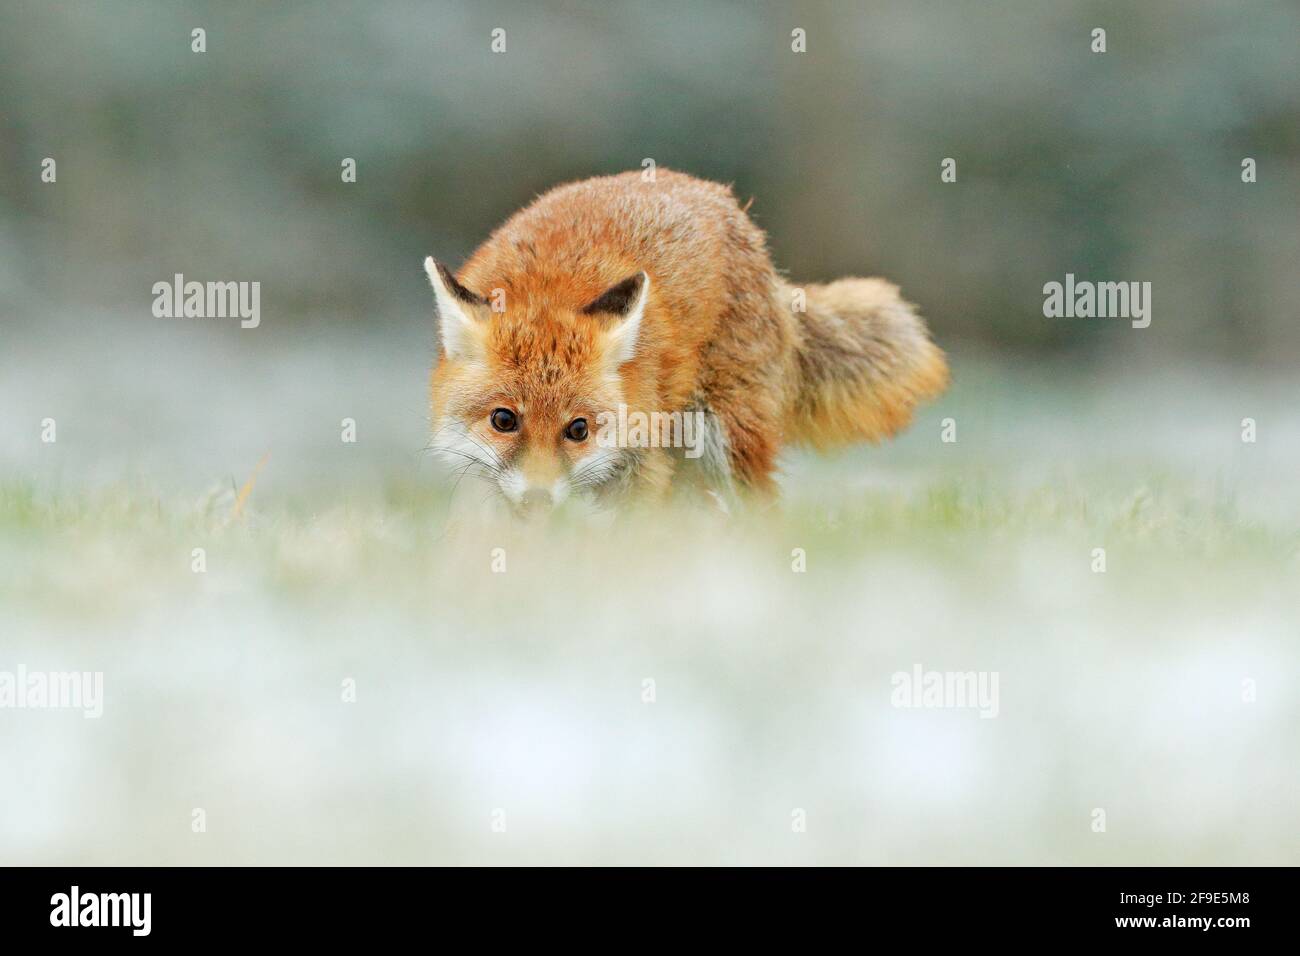 Red Fox jumping , Vulpes vulpes, wildlife scene from Europe. Orange fur coat animal in the nature habitat. Fox on the green forest meadow. Stock Photo